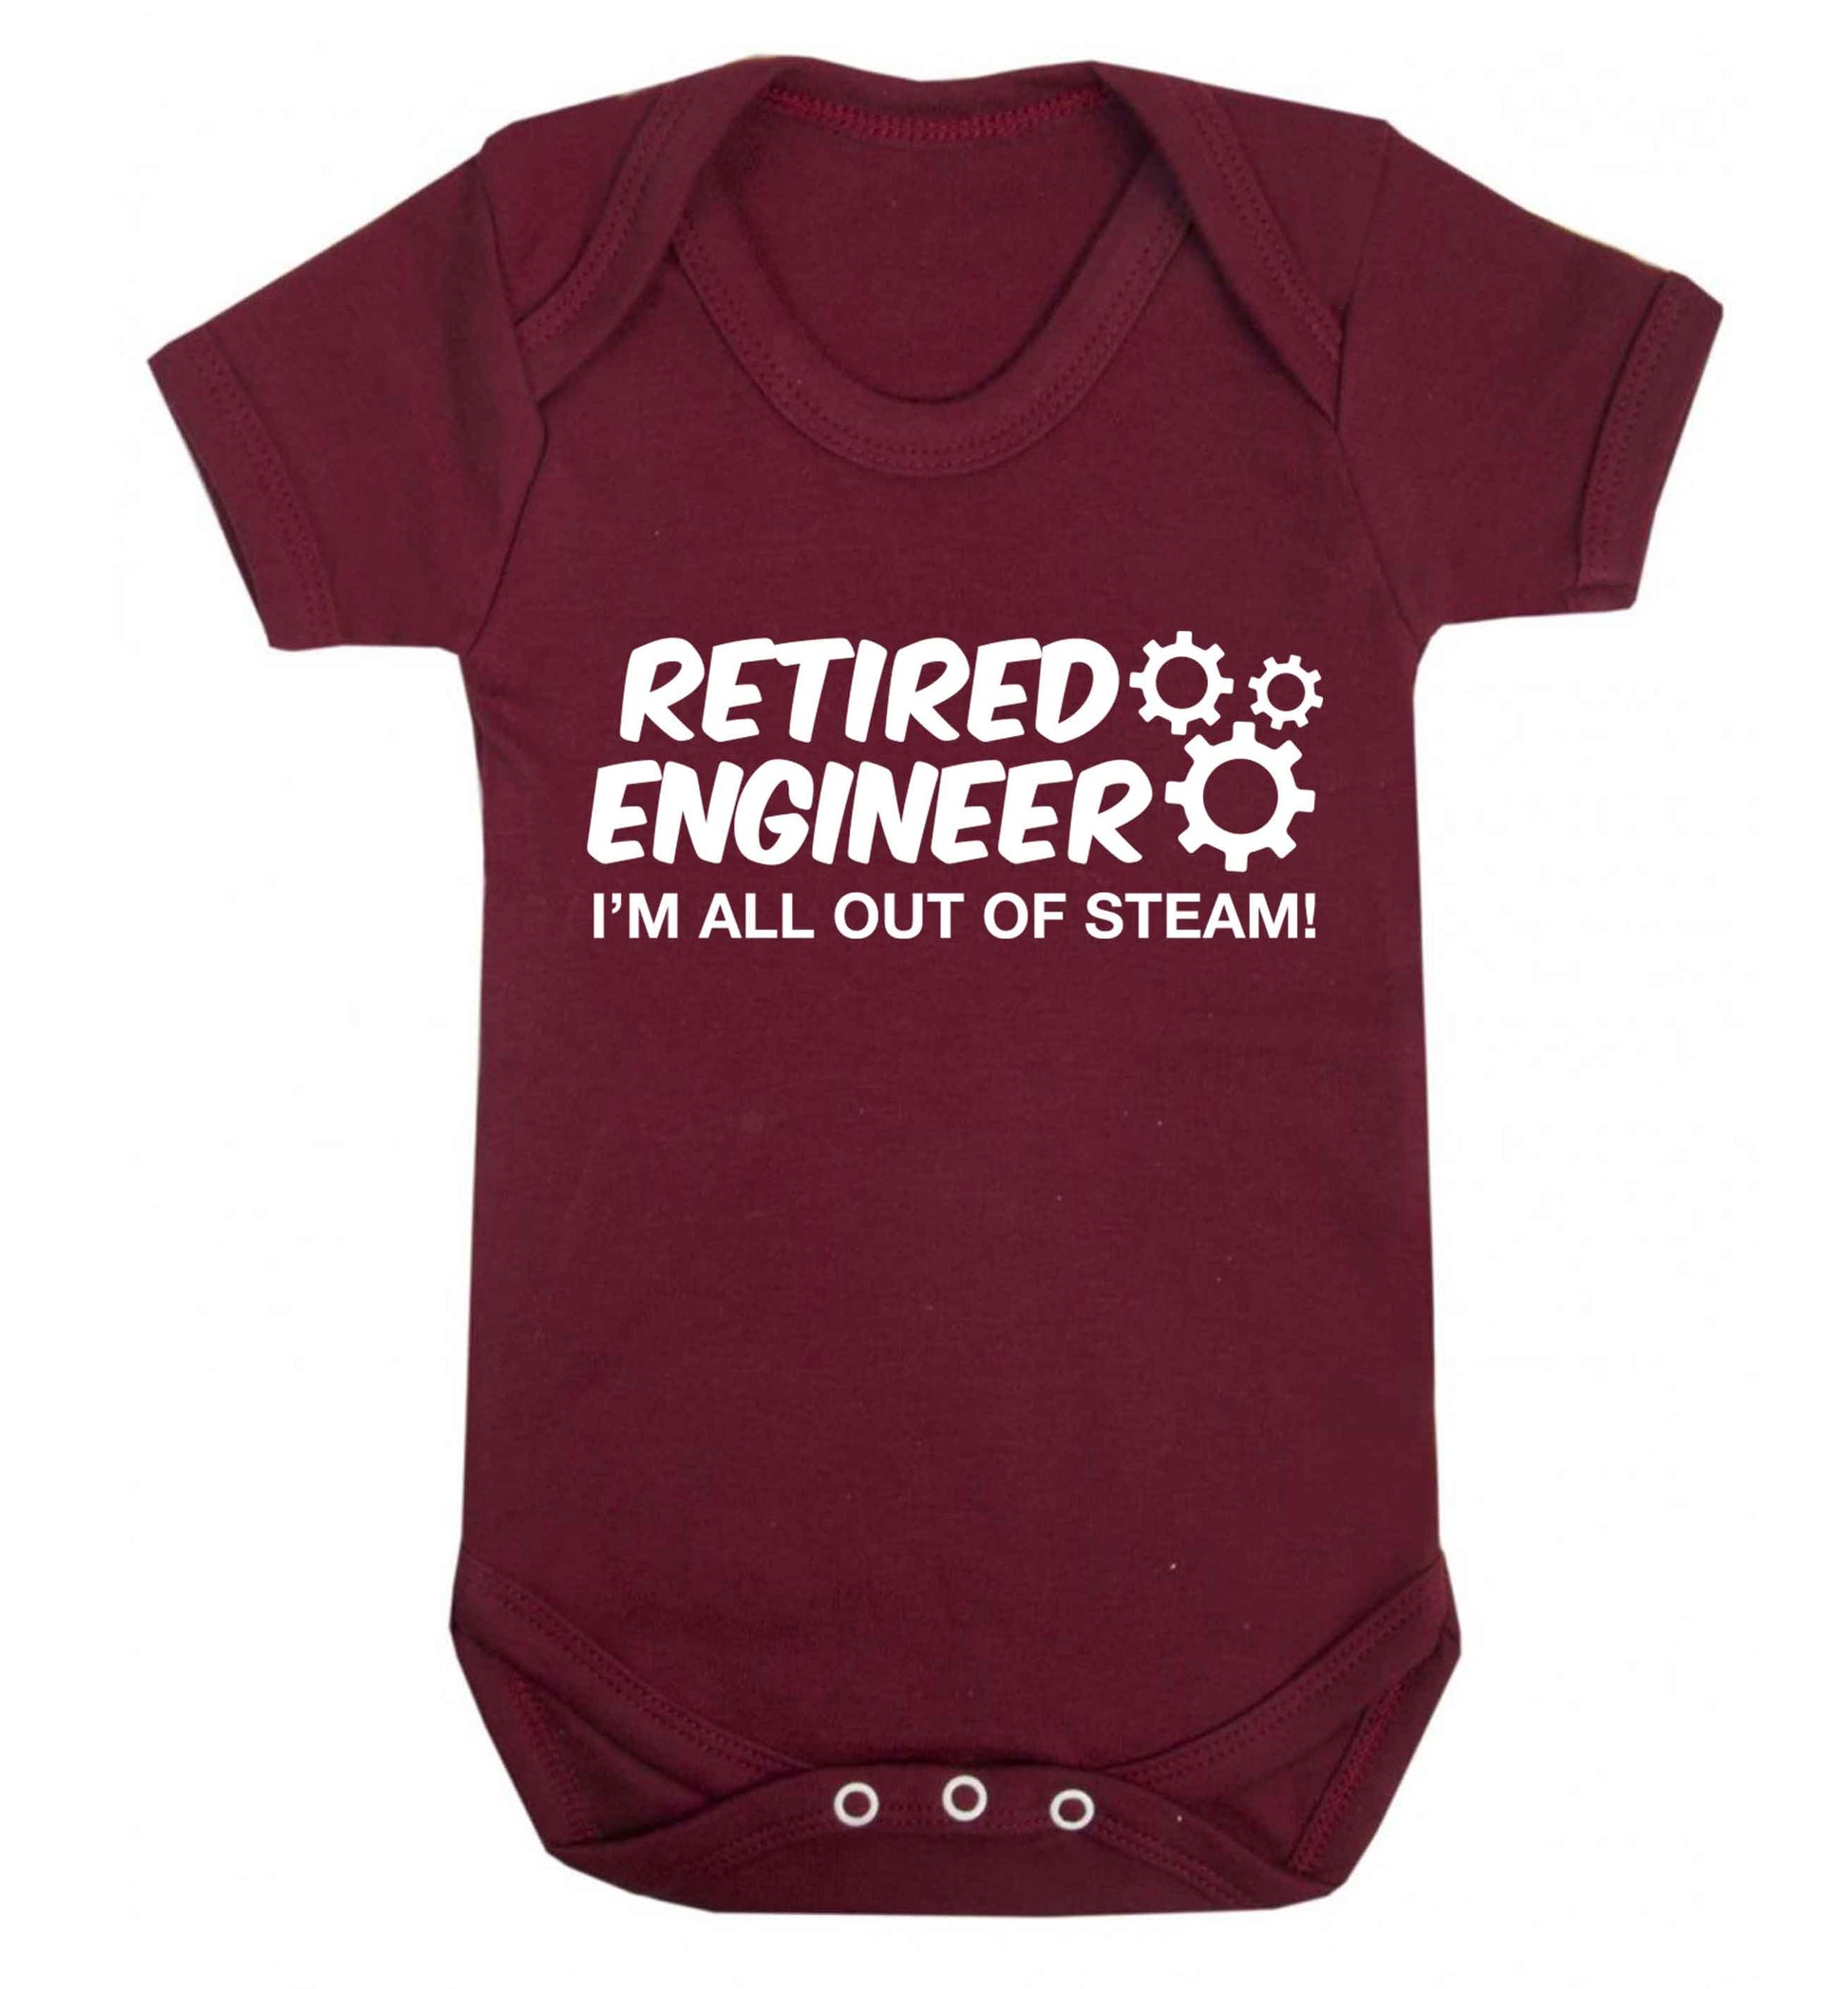 Retired engineer I'm all out of steam Baby Vest maroon 18-24 months